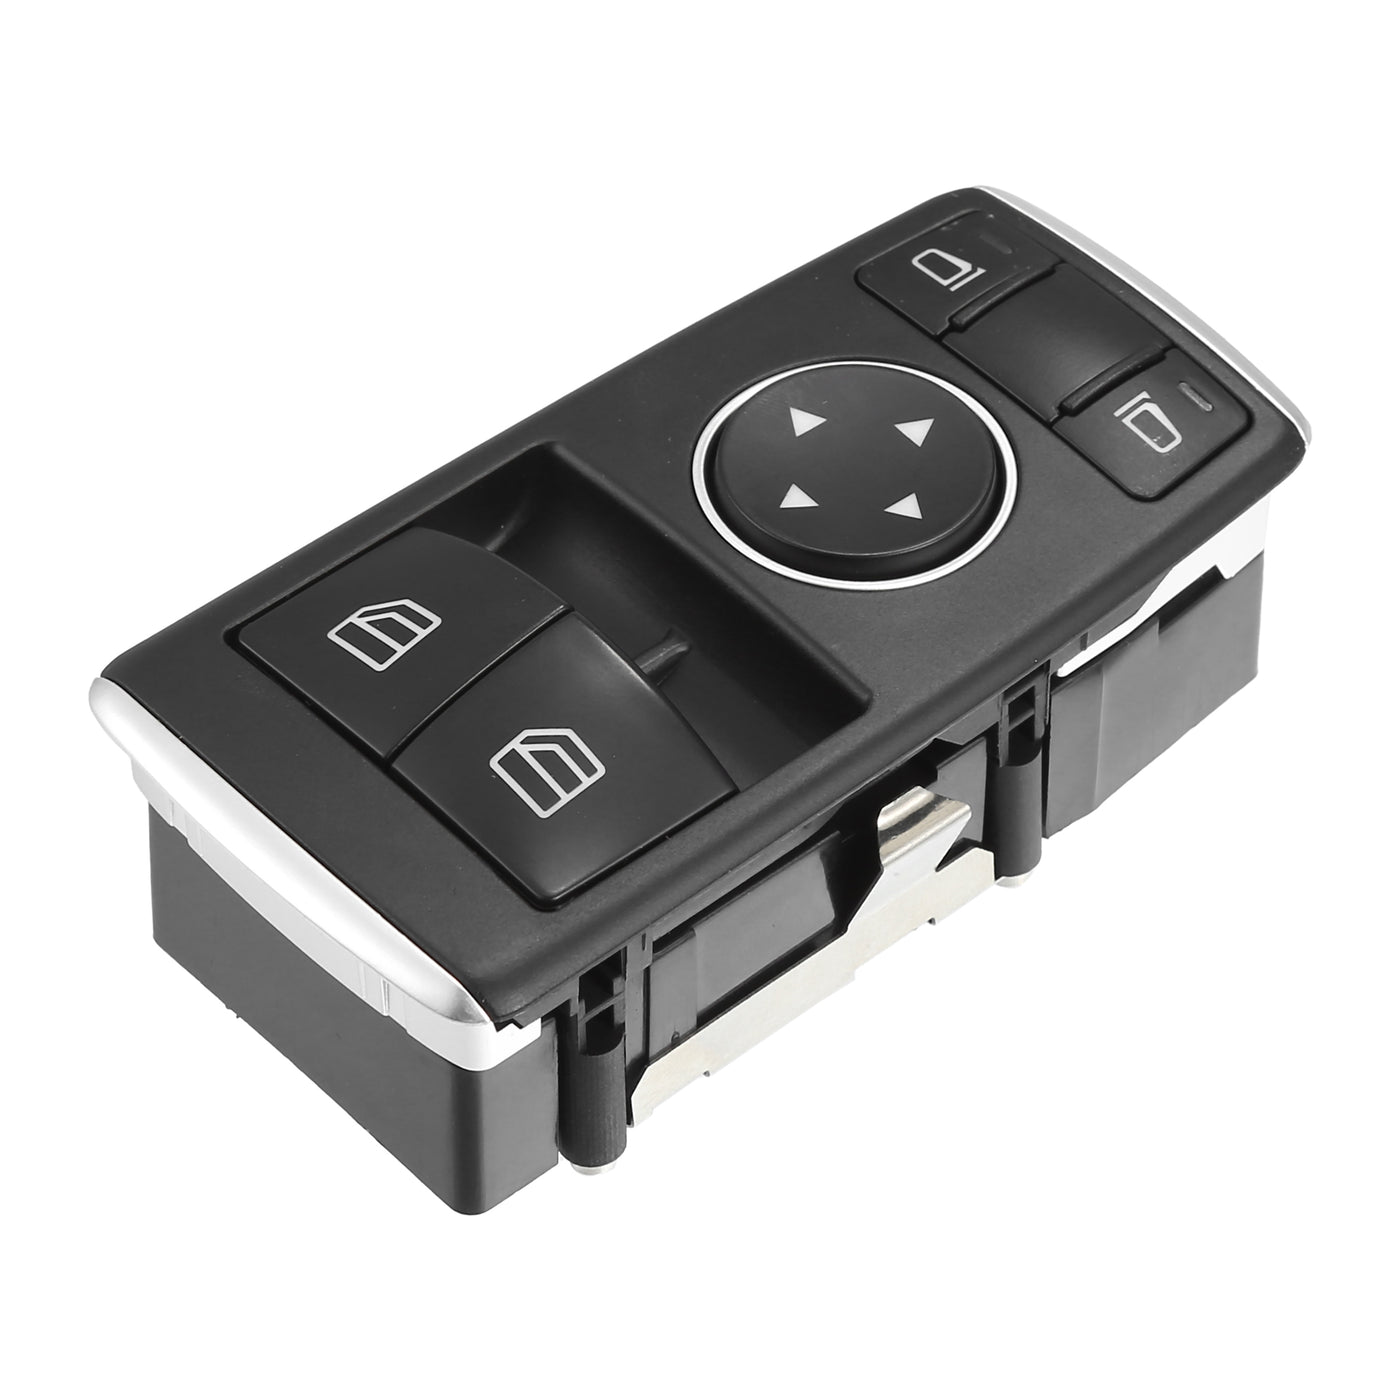 uxcell Uxcell Driver Side Power Window Switch Master No.A1729056800 for Mercedes Benz C Class C63 C W204 C180 C200 C220 C250 C350 2007-2014